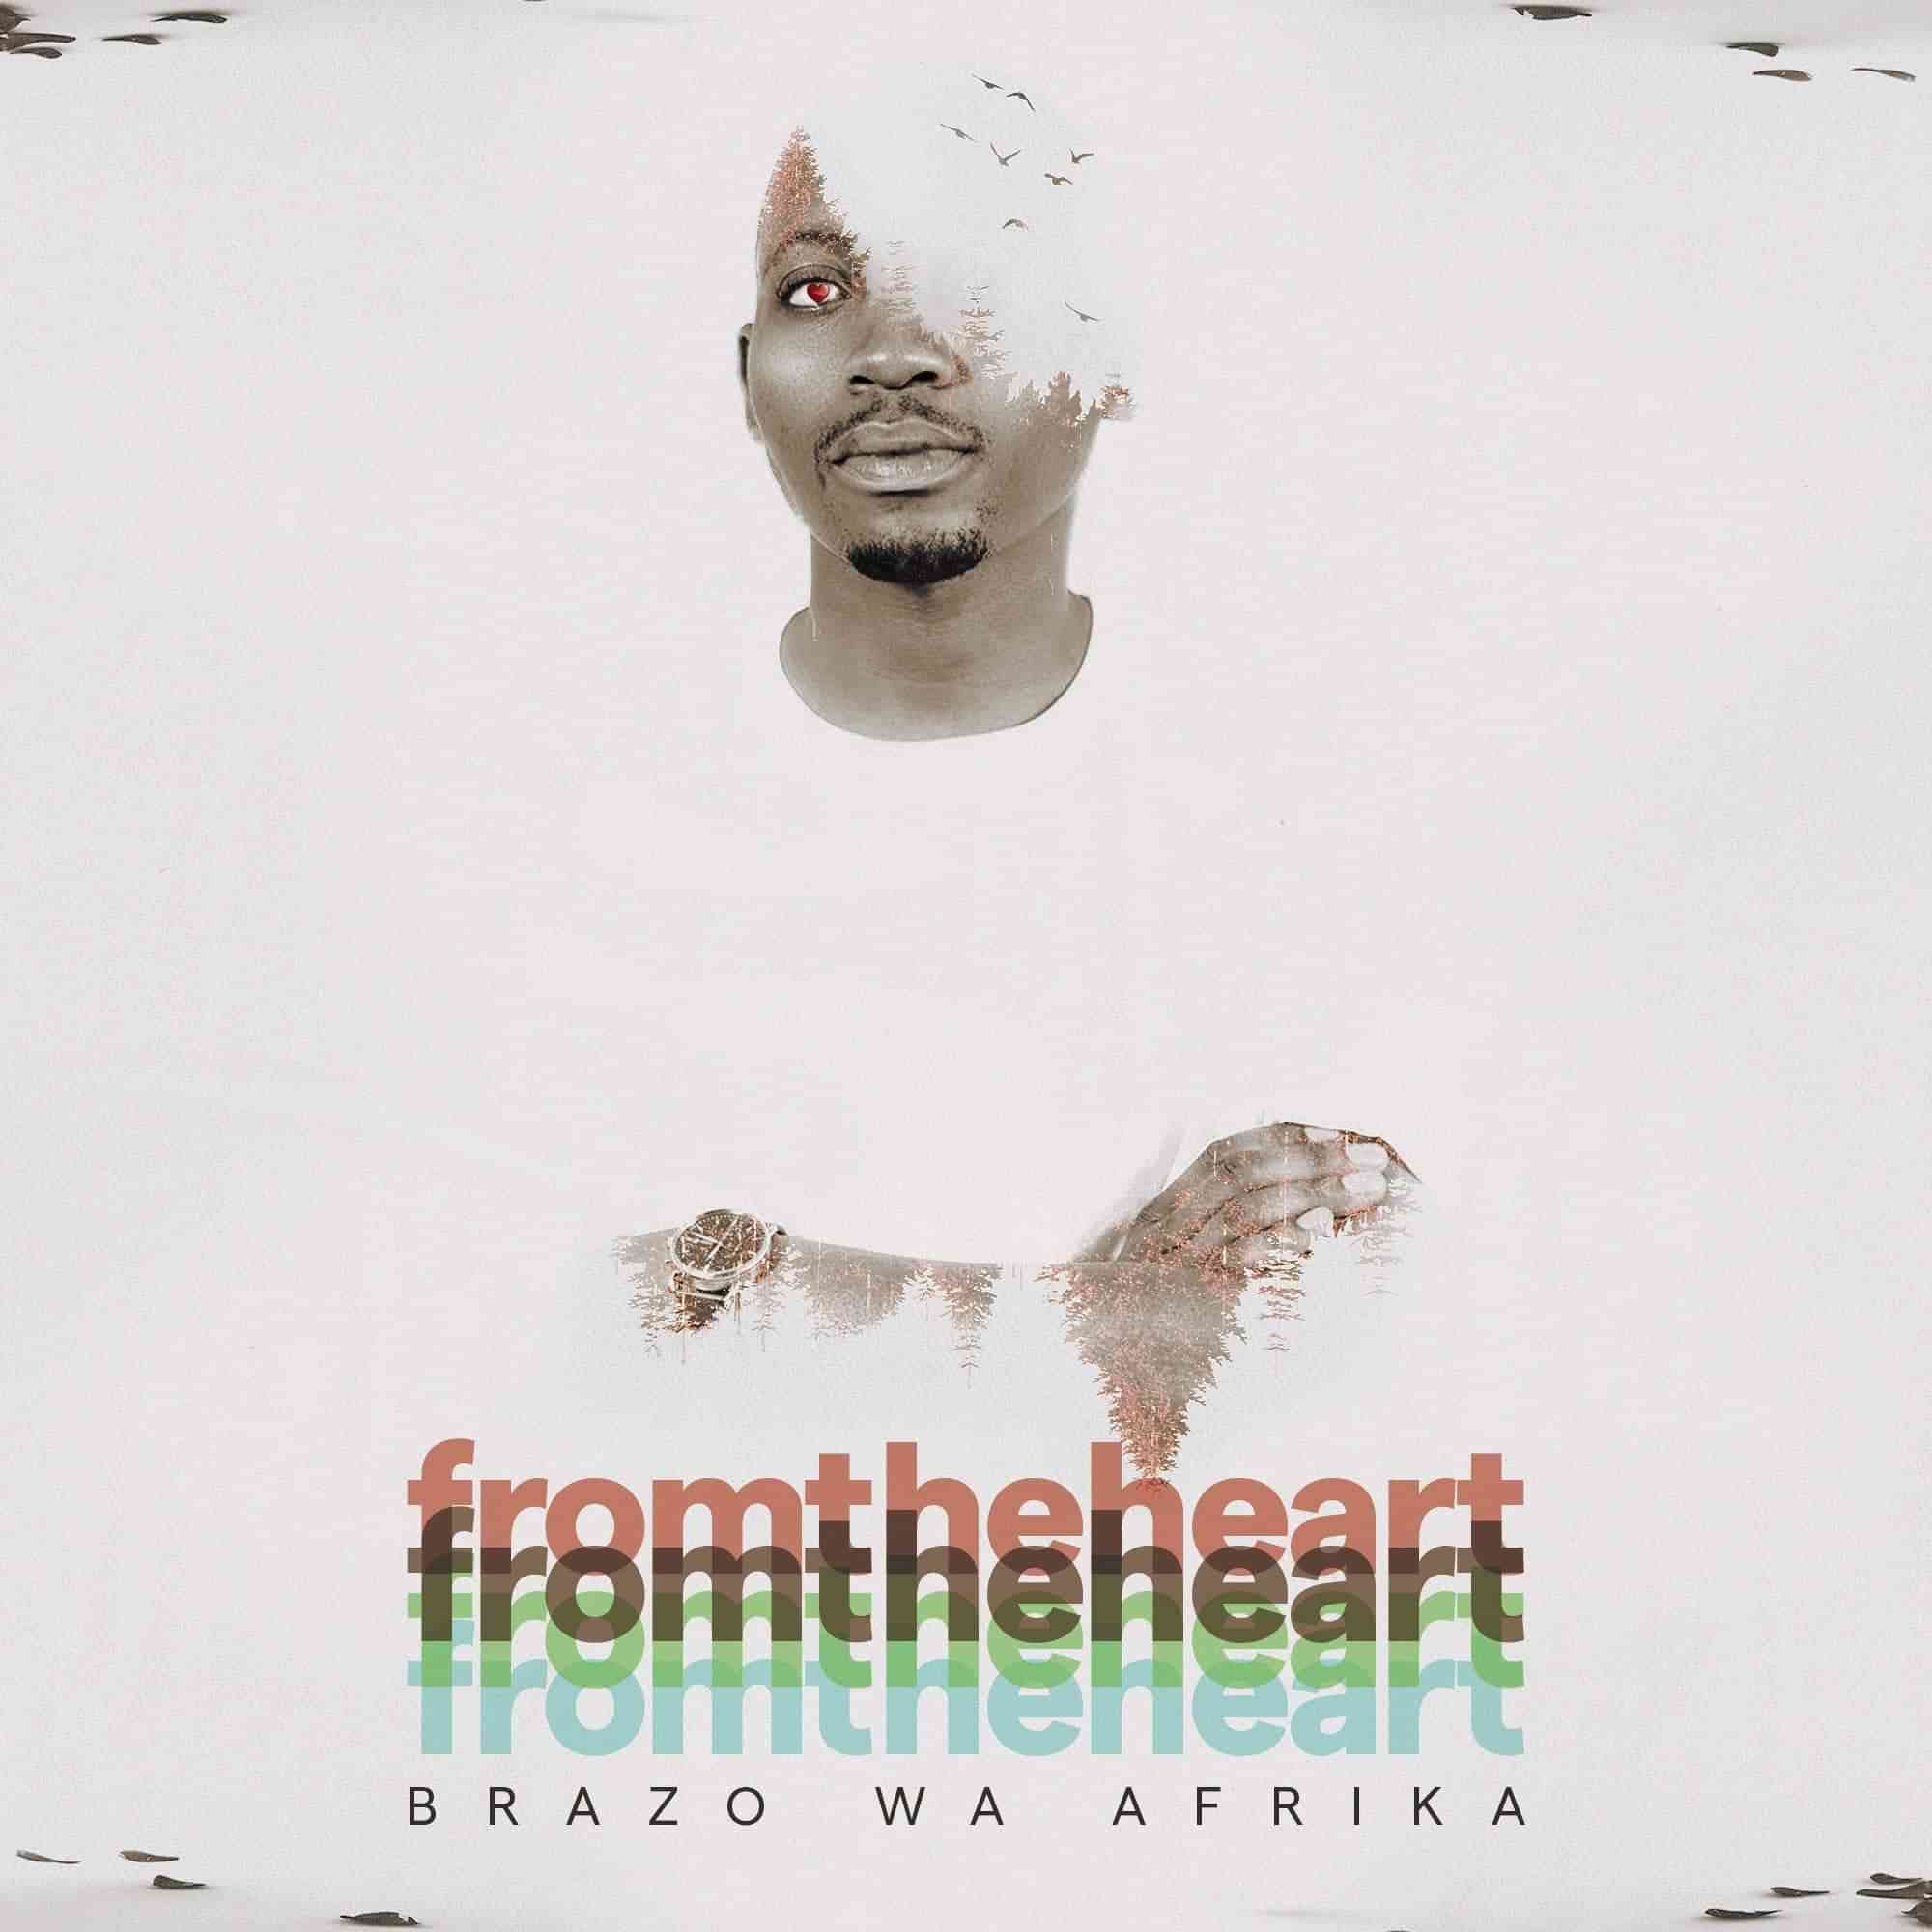 Brazo wa Afrika Prepares Us For A Soulful Journey With forthcoming From The Heart Album